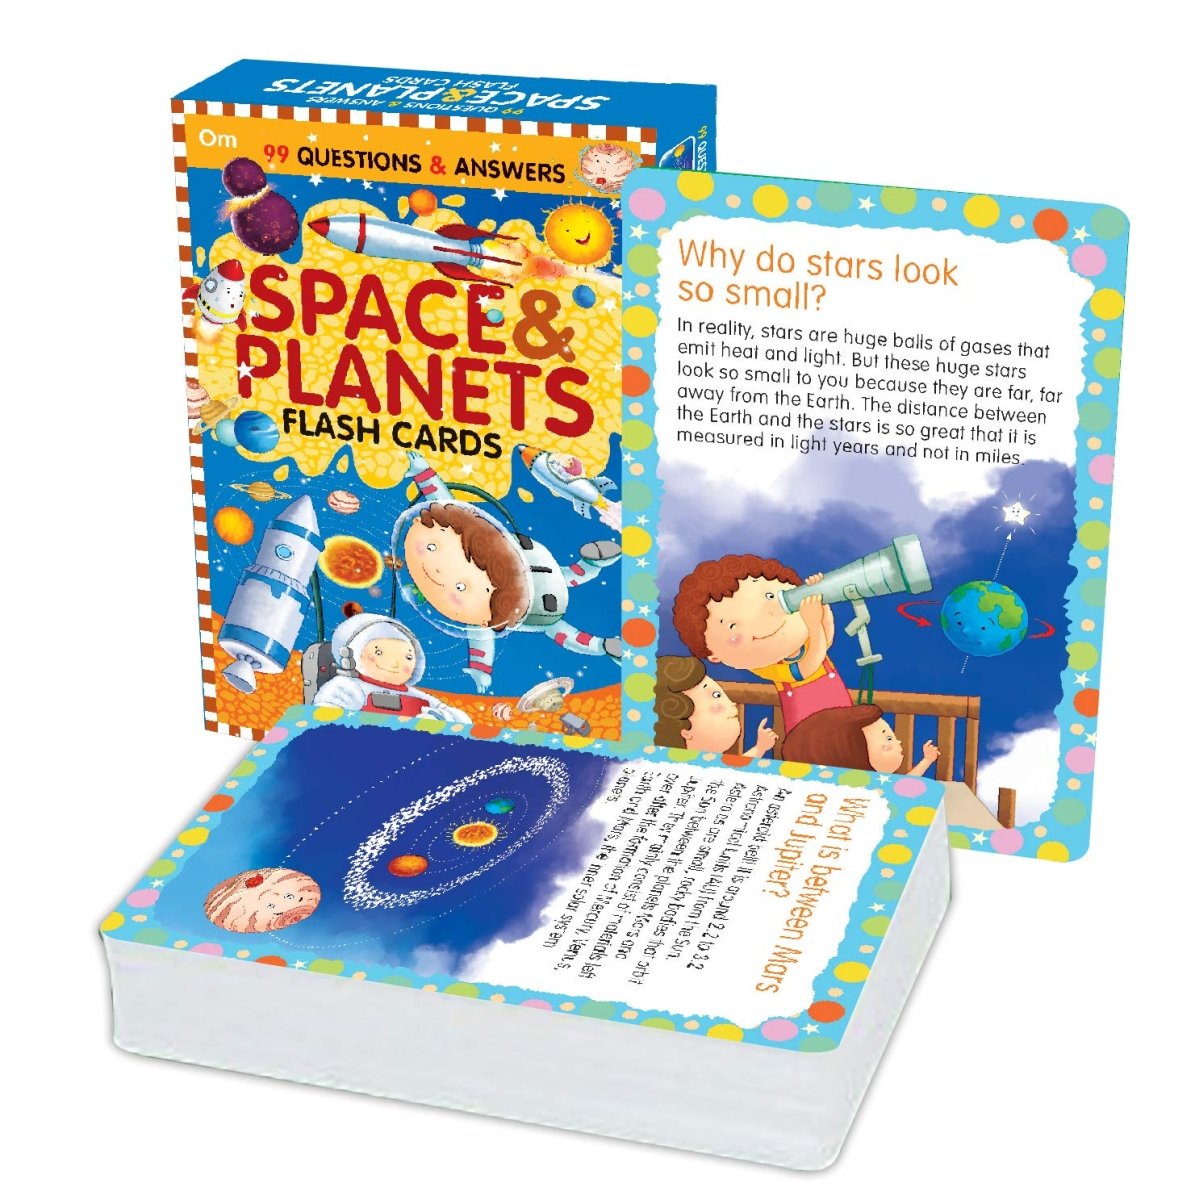 Om Books International 99 Questions and Answers Space and Planets Flash Cards - 9789352769209